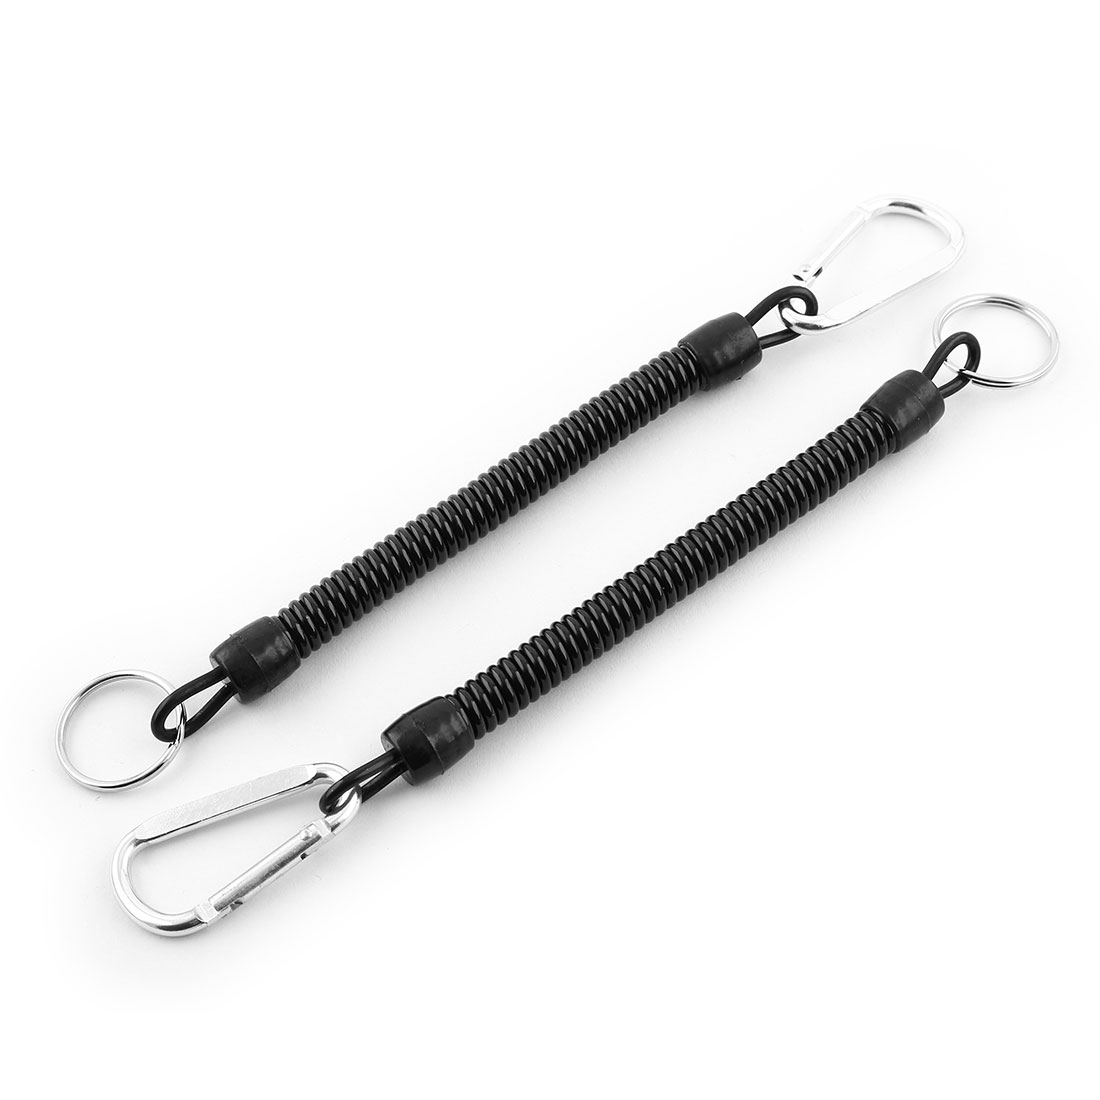 Unique Bargains Double Snap Hook Spring Carabiner Stretch String Coil Key Ring Silver Tone 2 PCS